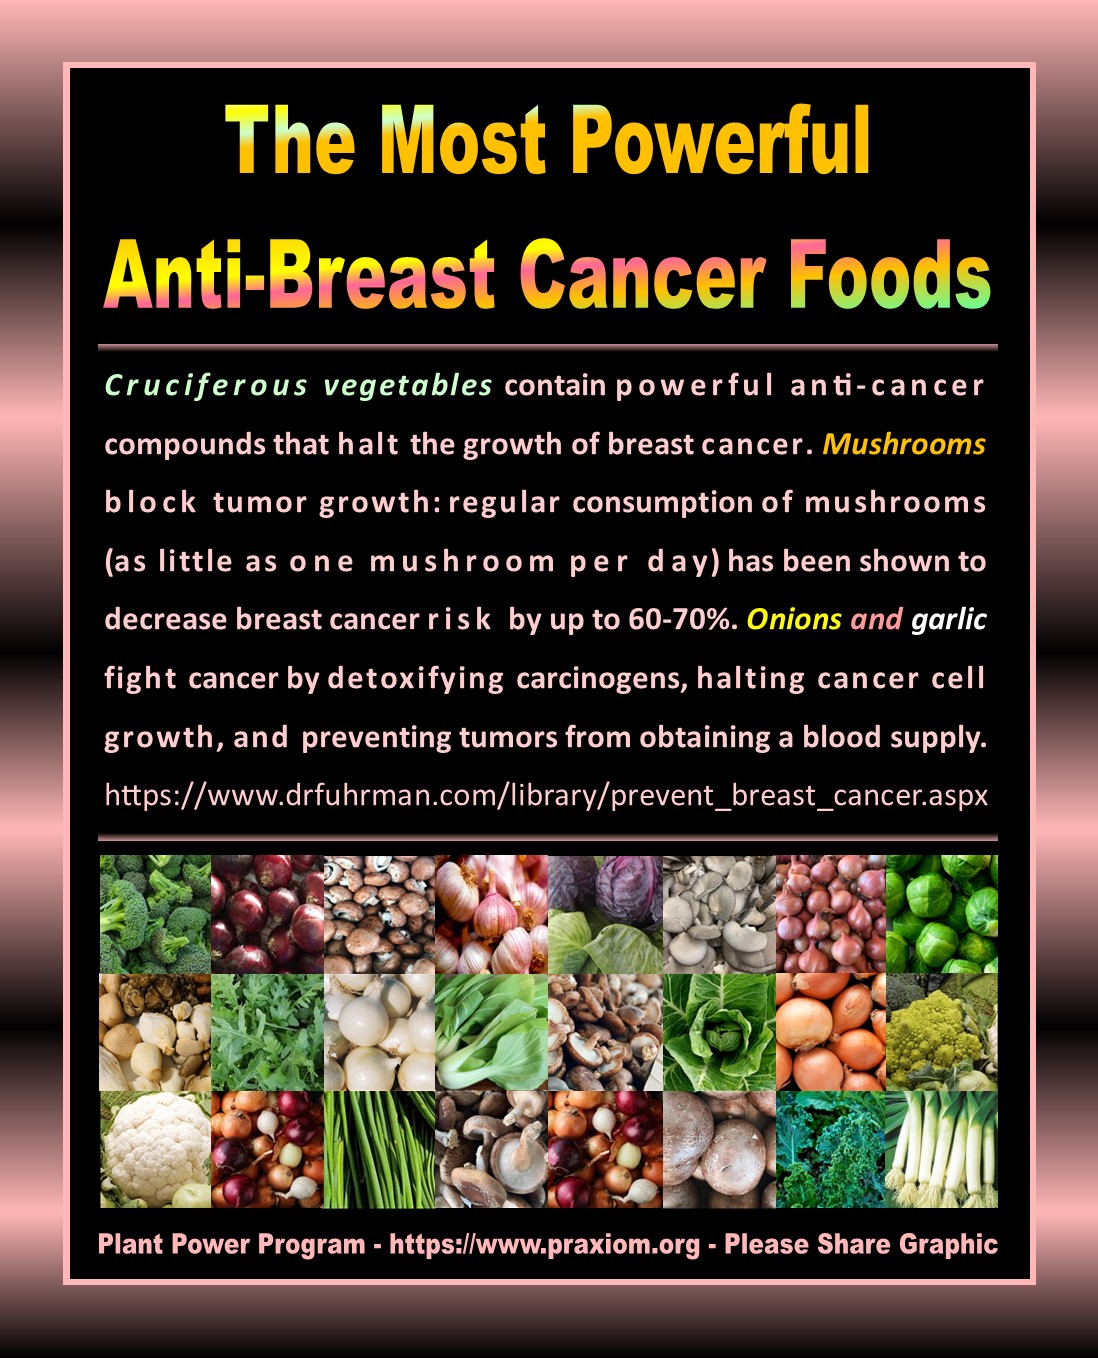 The Most Powerful Anti-Breast Cancer Foods